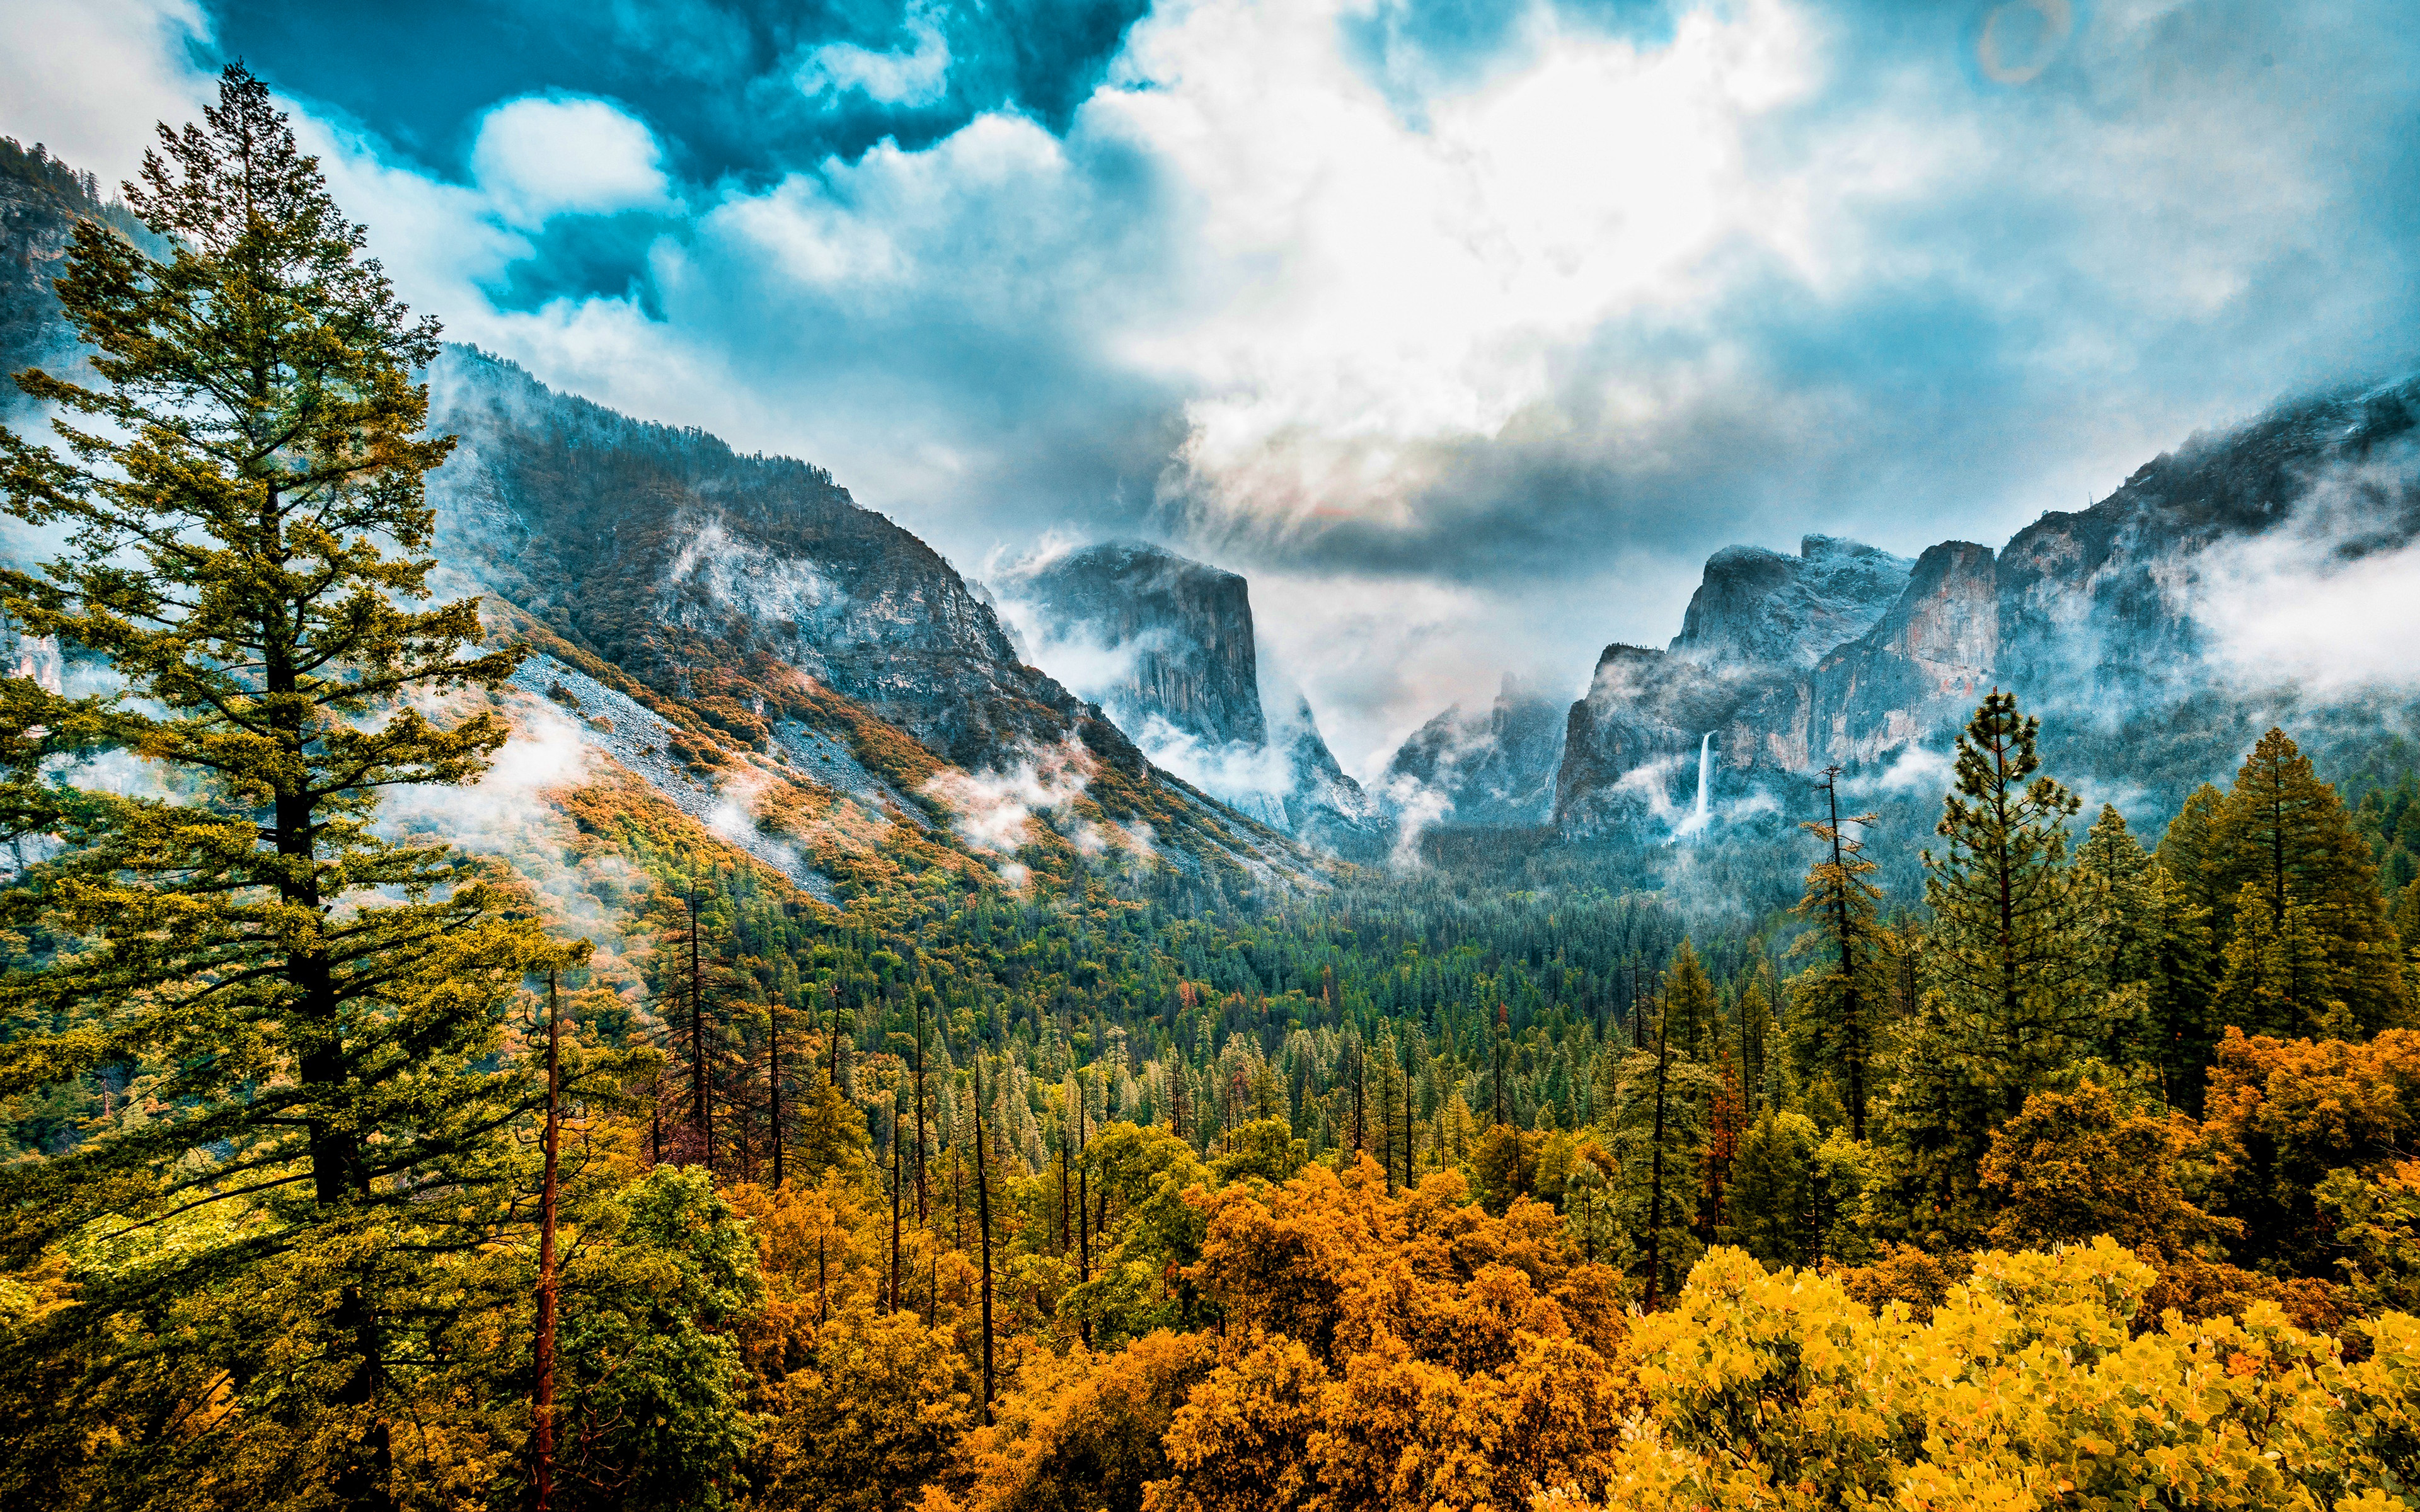 Download wallpaper Yosemite National Park, 4k, autumn, mountains, forest, Sierra Nevada, California, USA, beautiful nature, autumn landscape for desktop with resolution 3840x2400. High Quality HD picture wallpaper